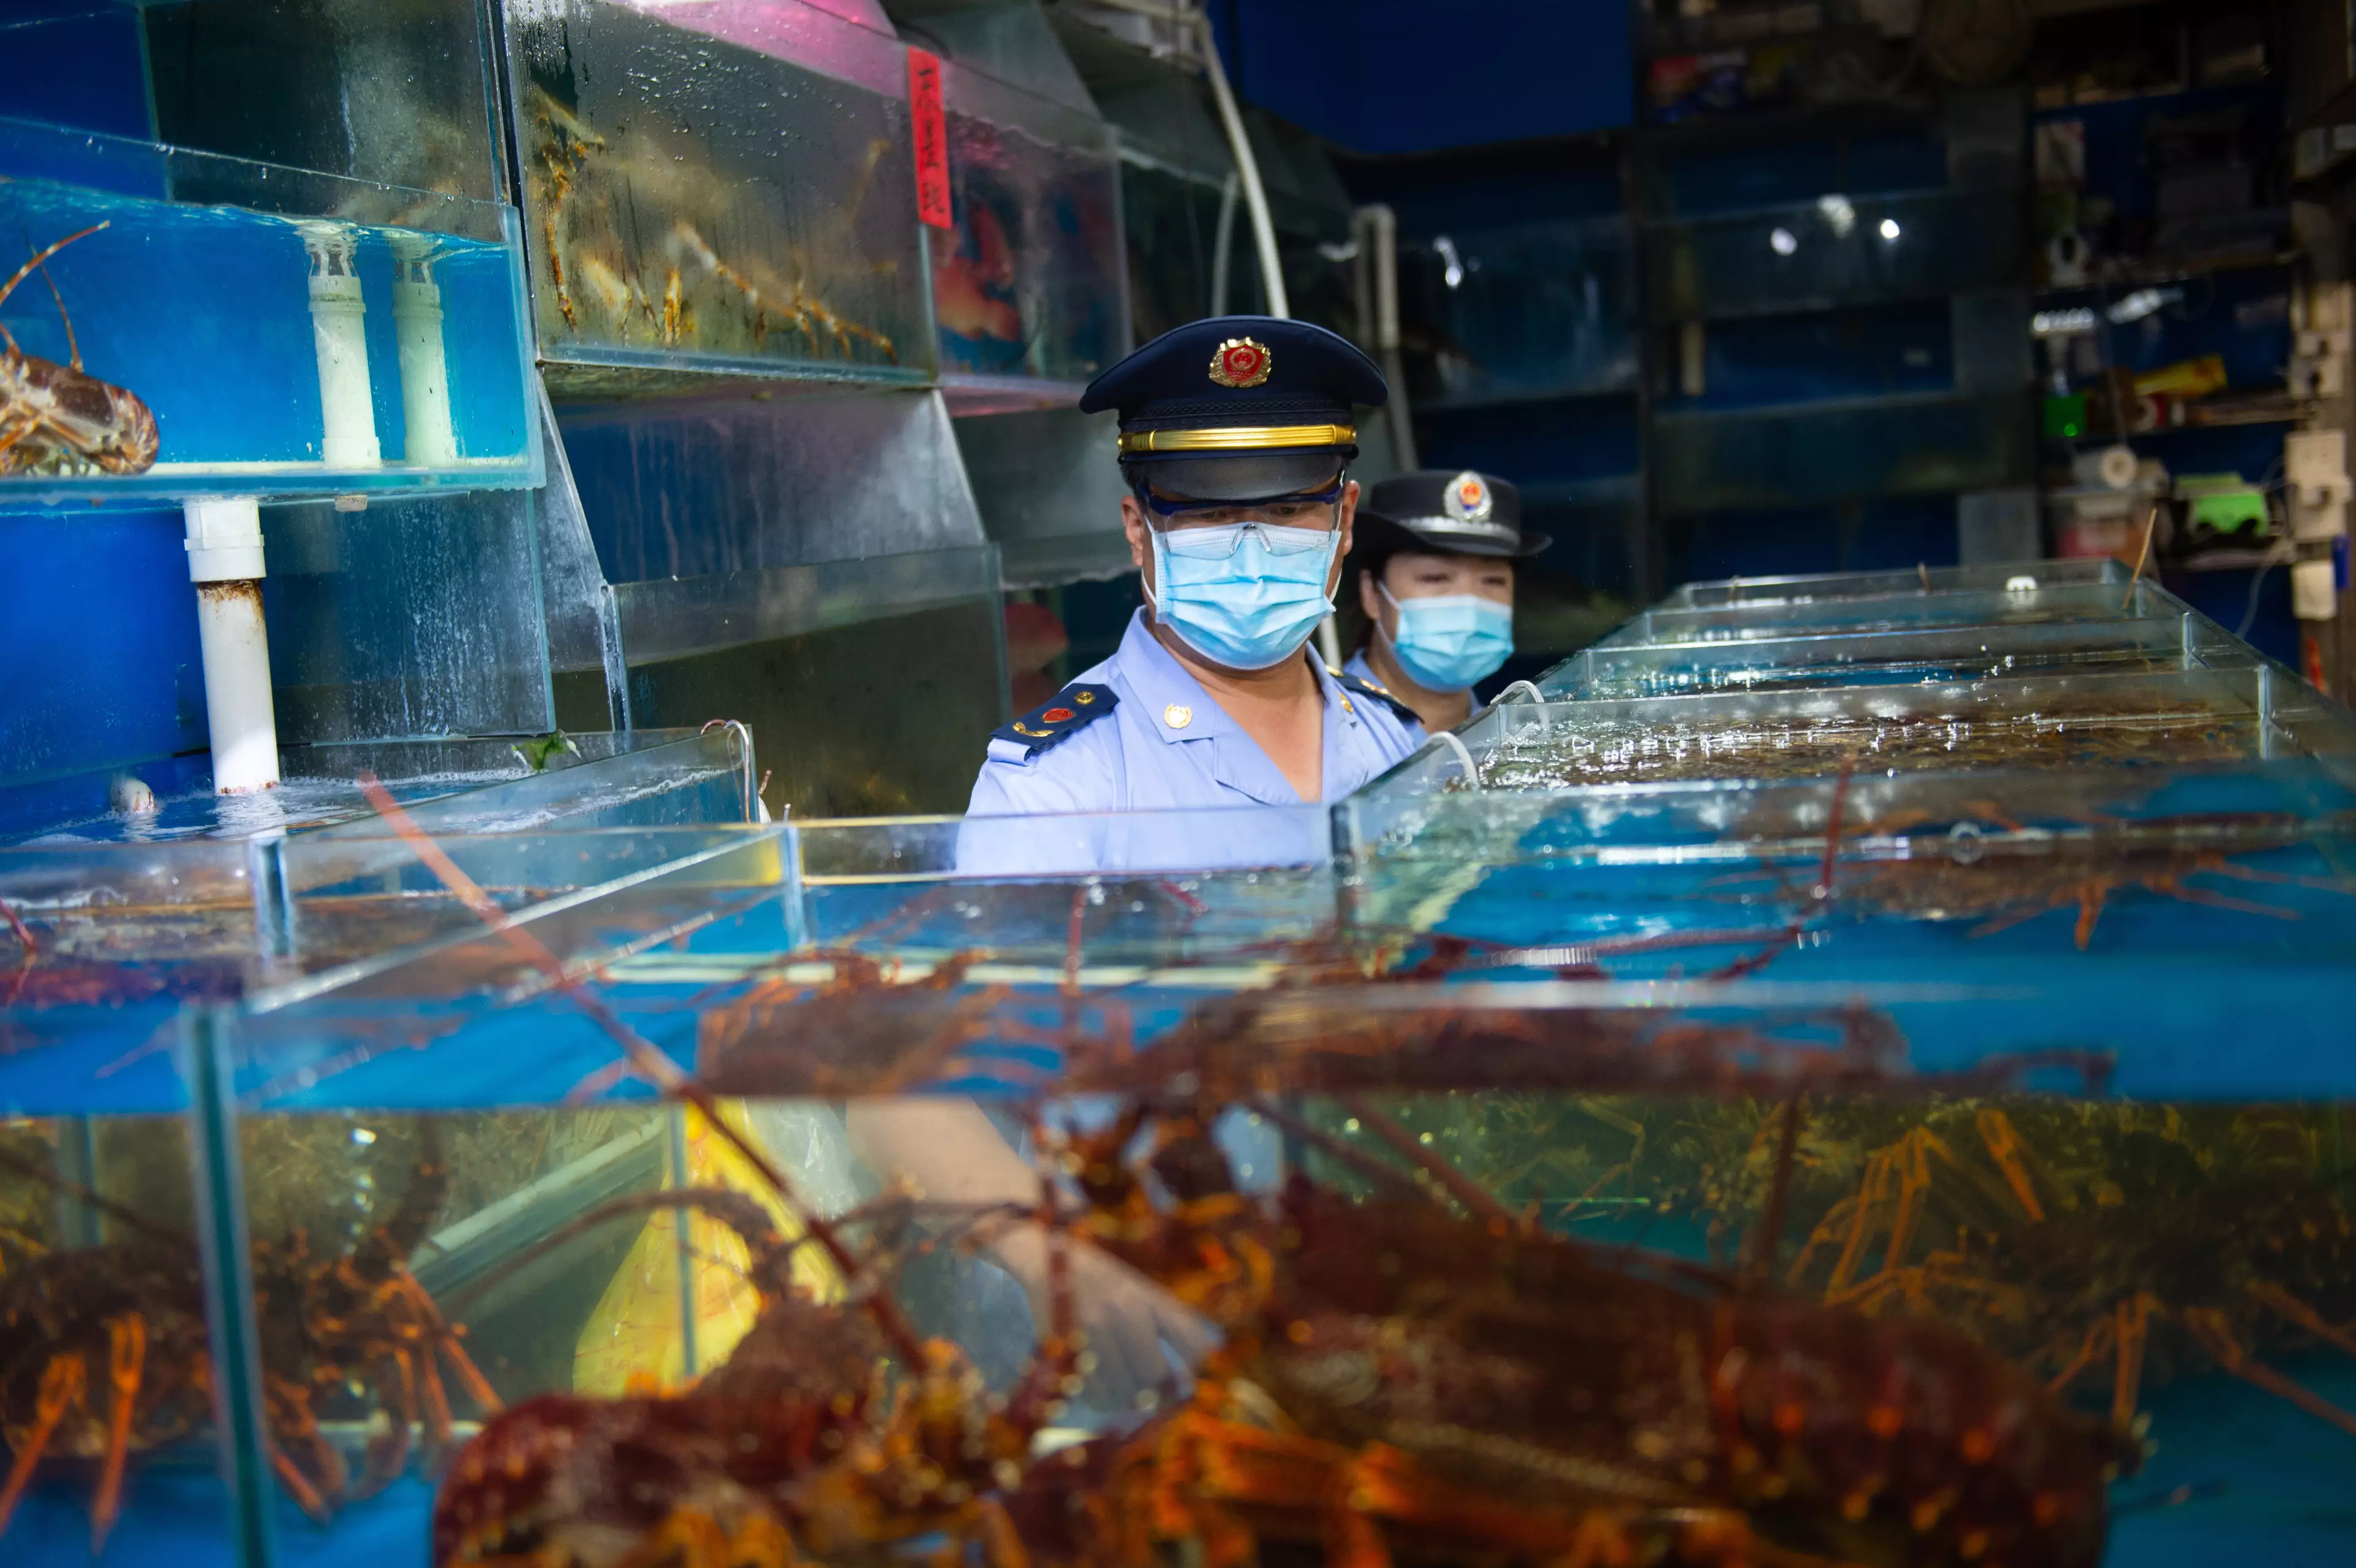 Staff from the market supervision administration of Fengtai District inspect the sea food trading hall of the Yuegezhuang wholesale market in Beijing.